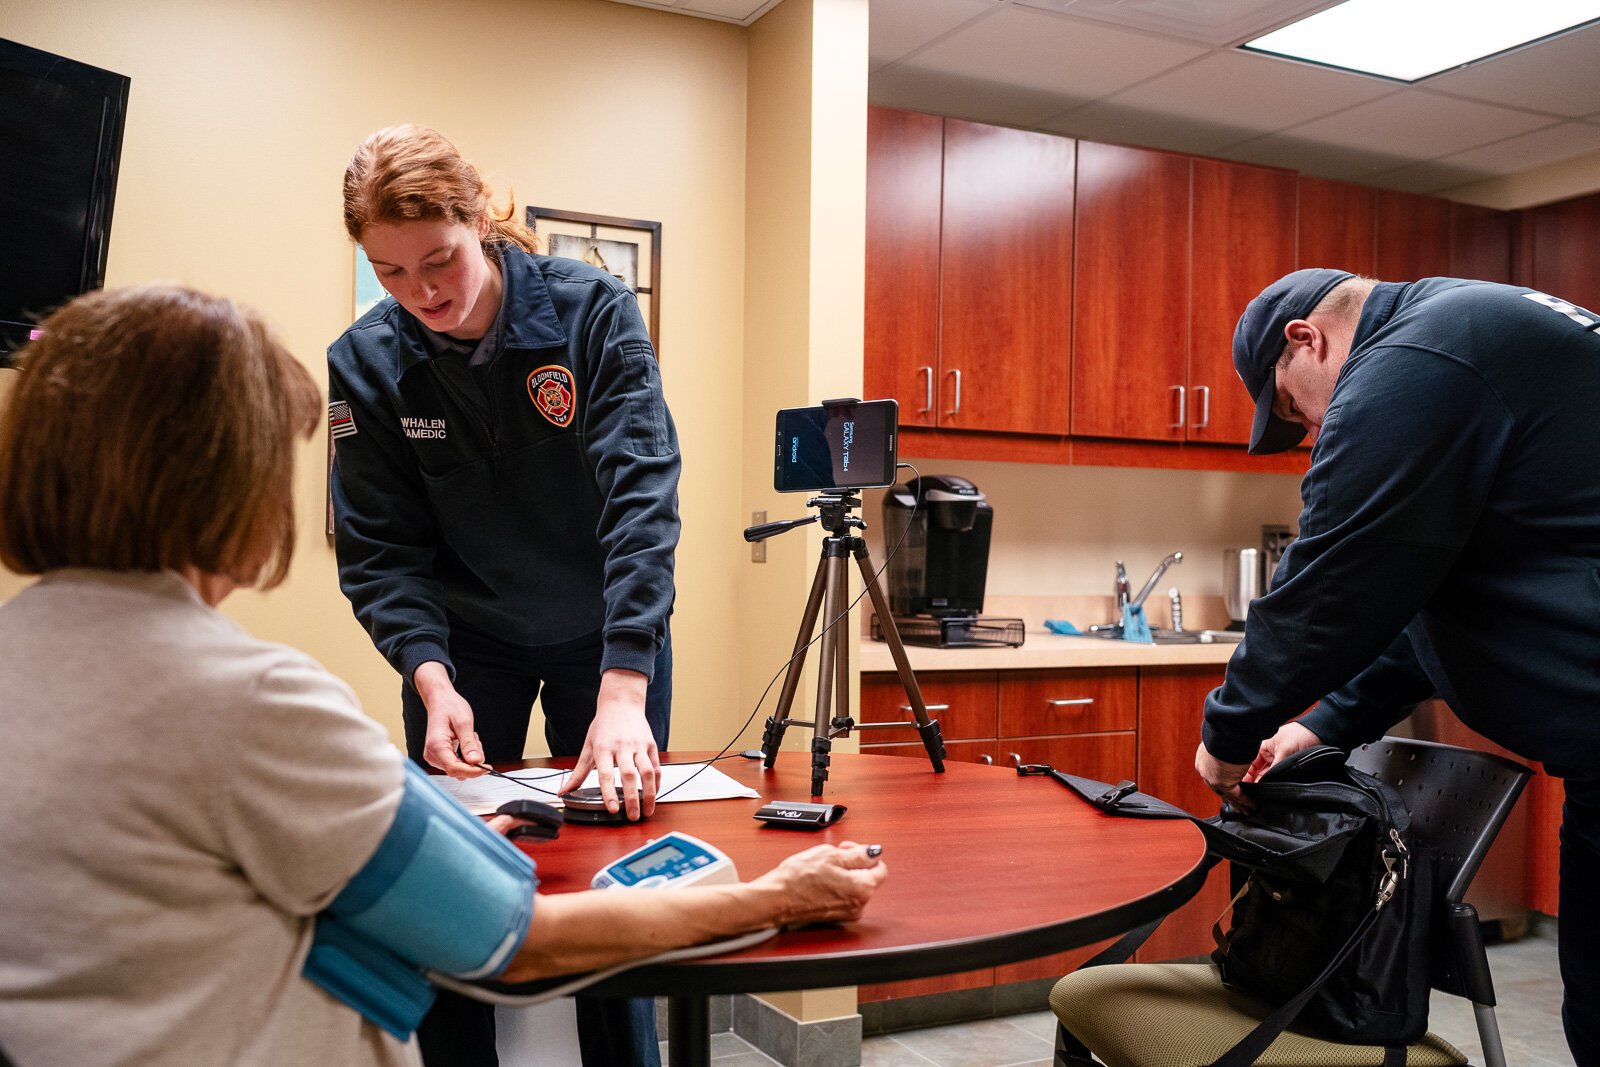 Community integrated paramedics Kim Whalen and Lt. Kevin Bailey of the Bloomfield Township Fire Department conduct a patient visit.